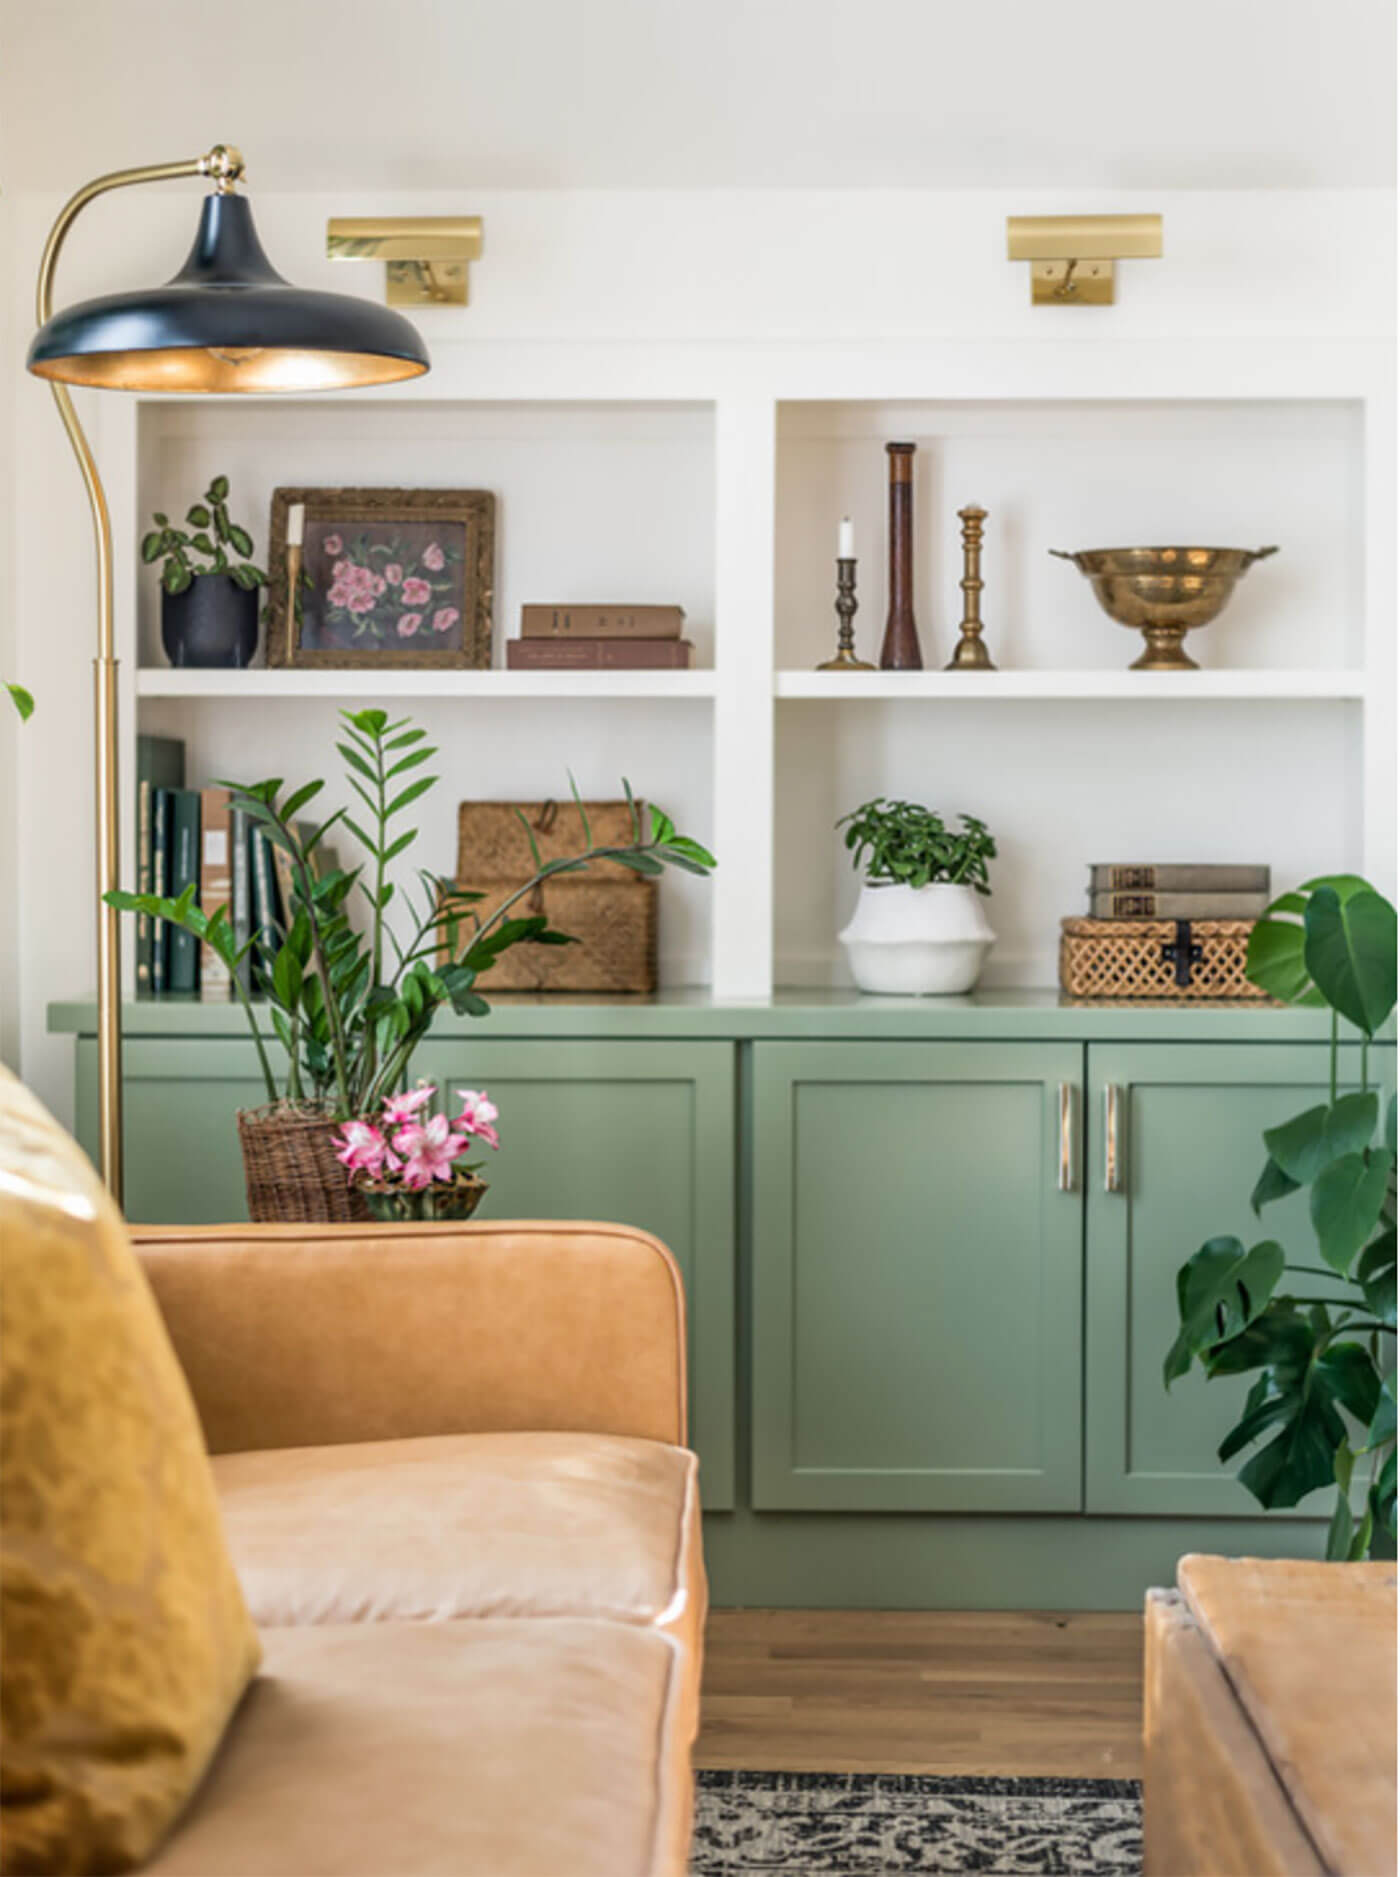 Living room with green painted cabinets and leather sofa for summer decor